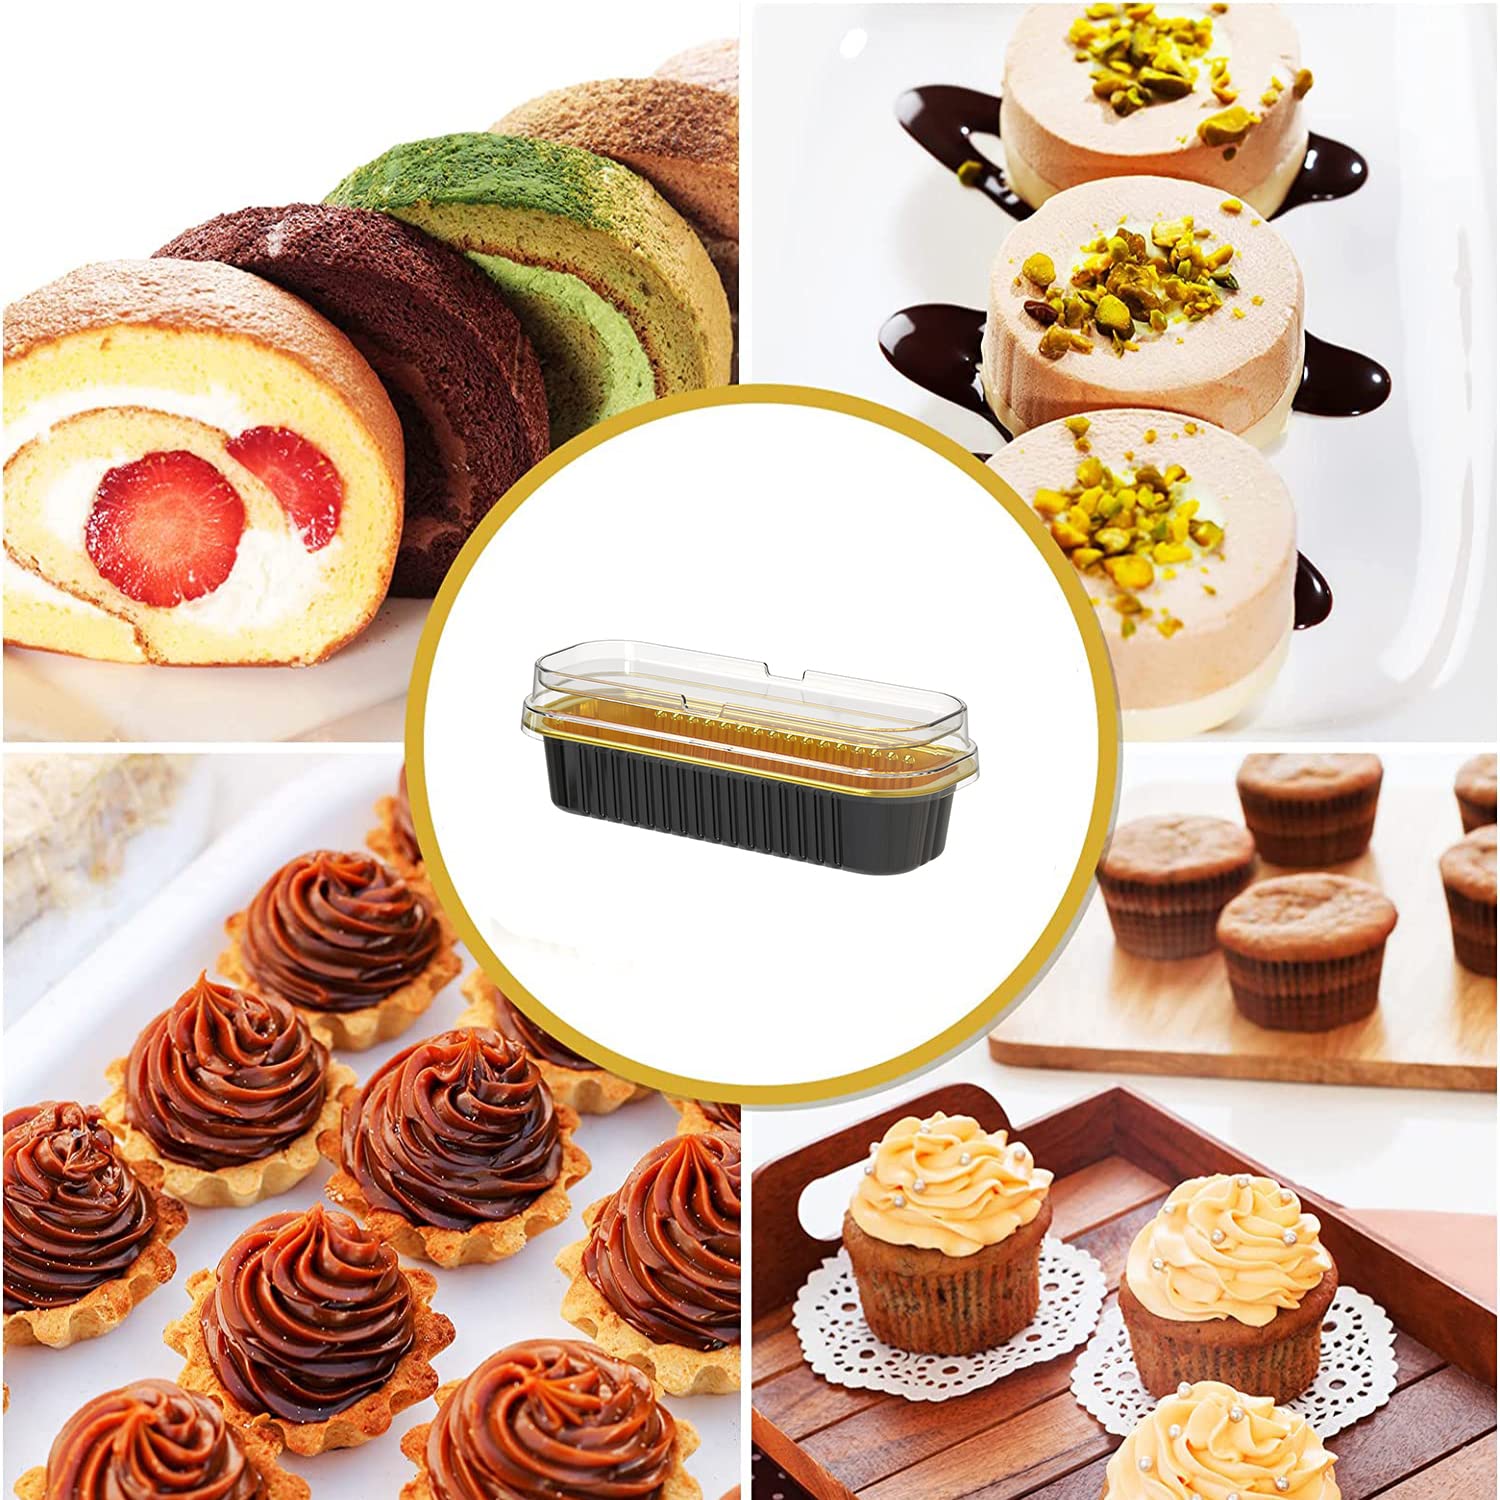 50 Pack Aluminum Foil Mini Loaf Pans With Lids, 6.8oz Disposable Aluminum Foil Ramekins Baking Cups, Rectangle Cupcake Baking Cups for Bread Muffin Cheesecake